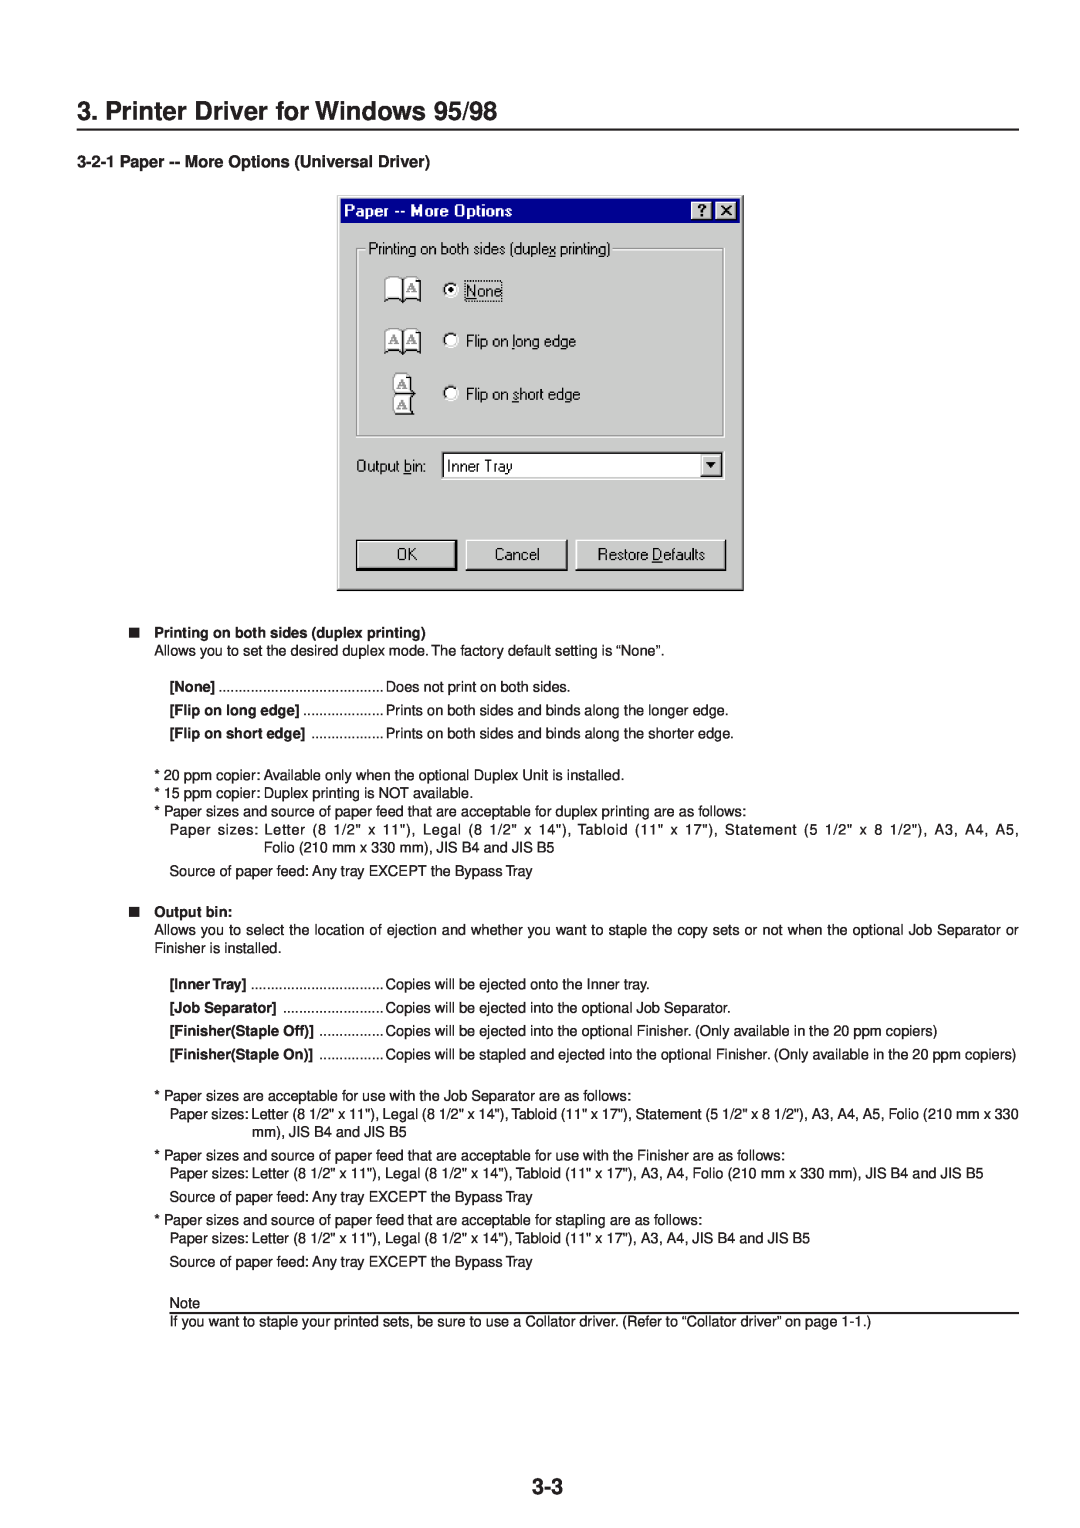 IBM Printing System Printer Driver for Windows 95/98, Paper -- More Options Universal Driver, Does not print on both sides 